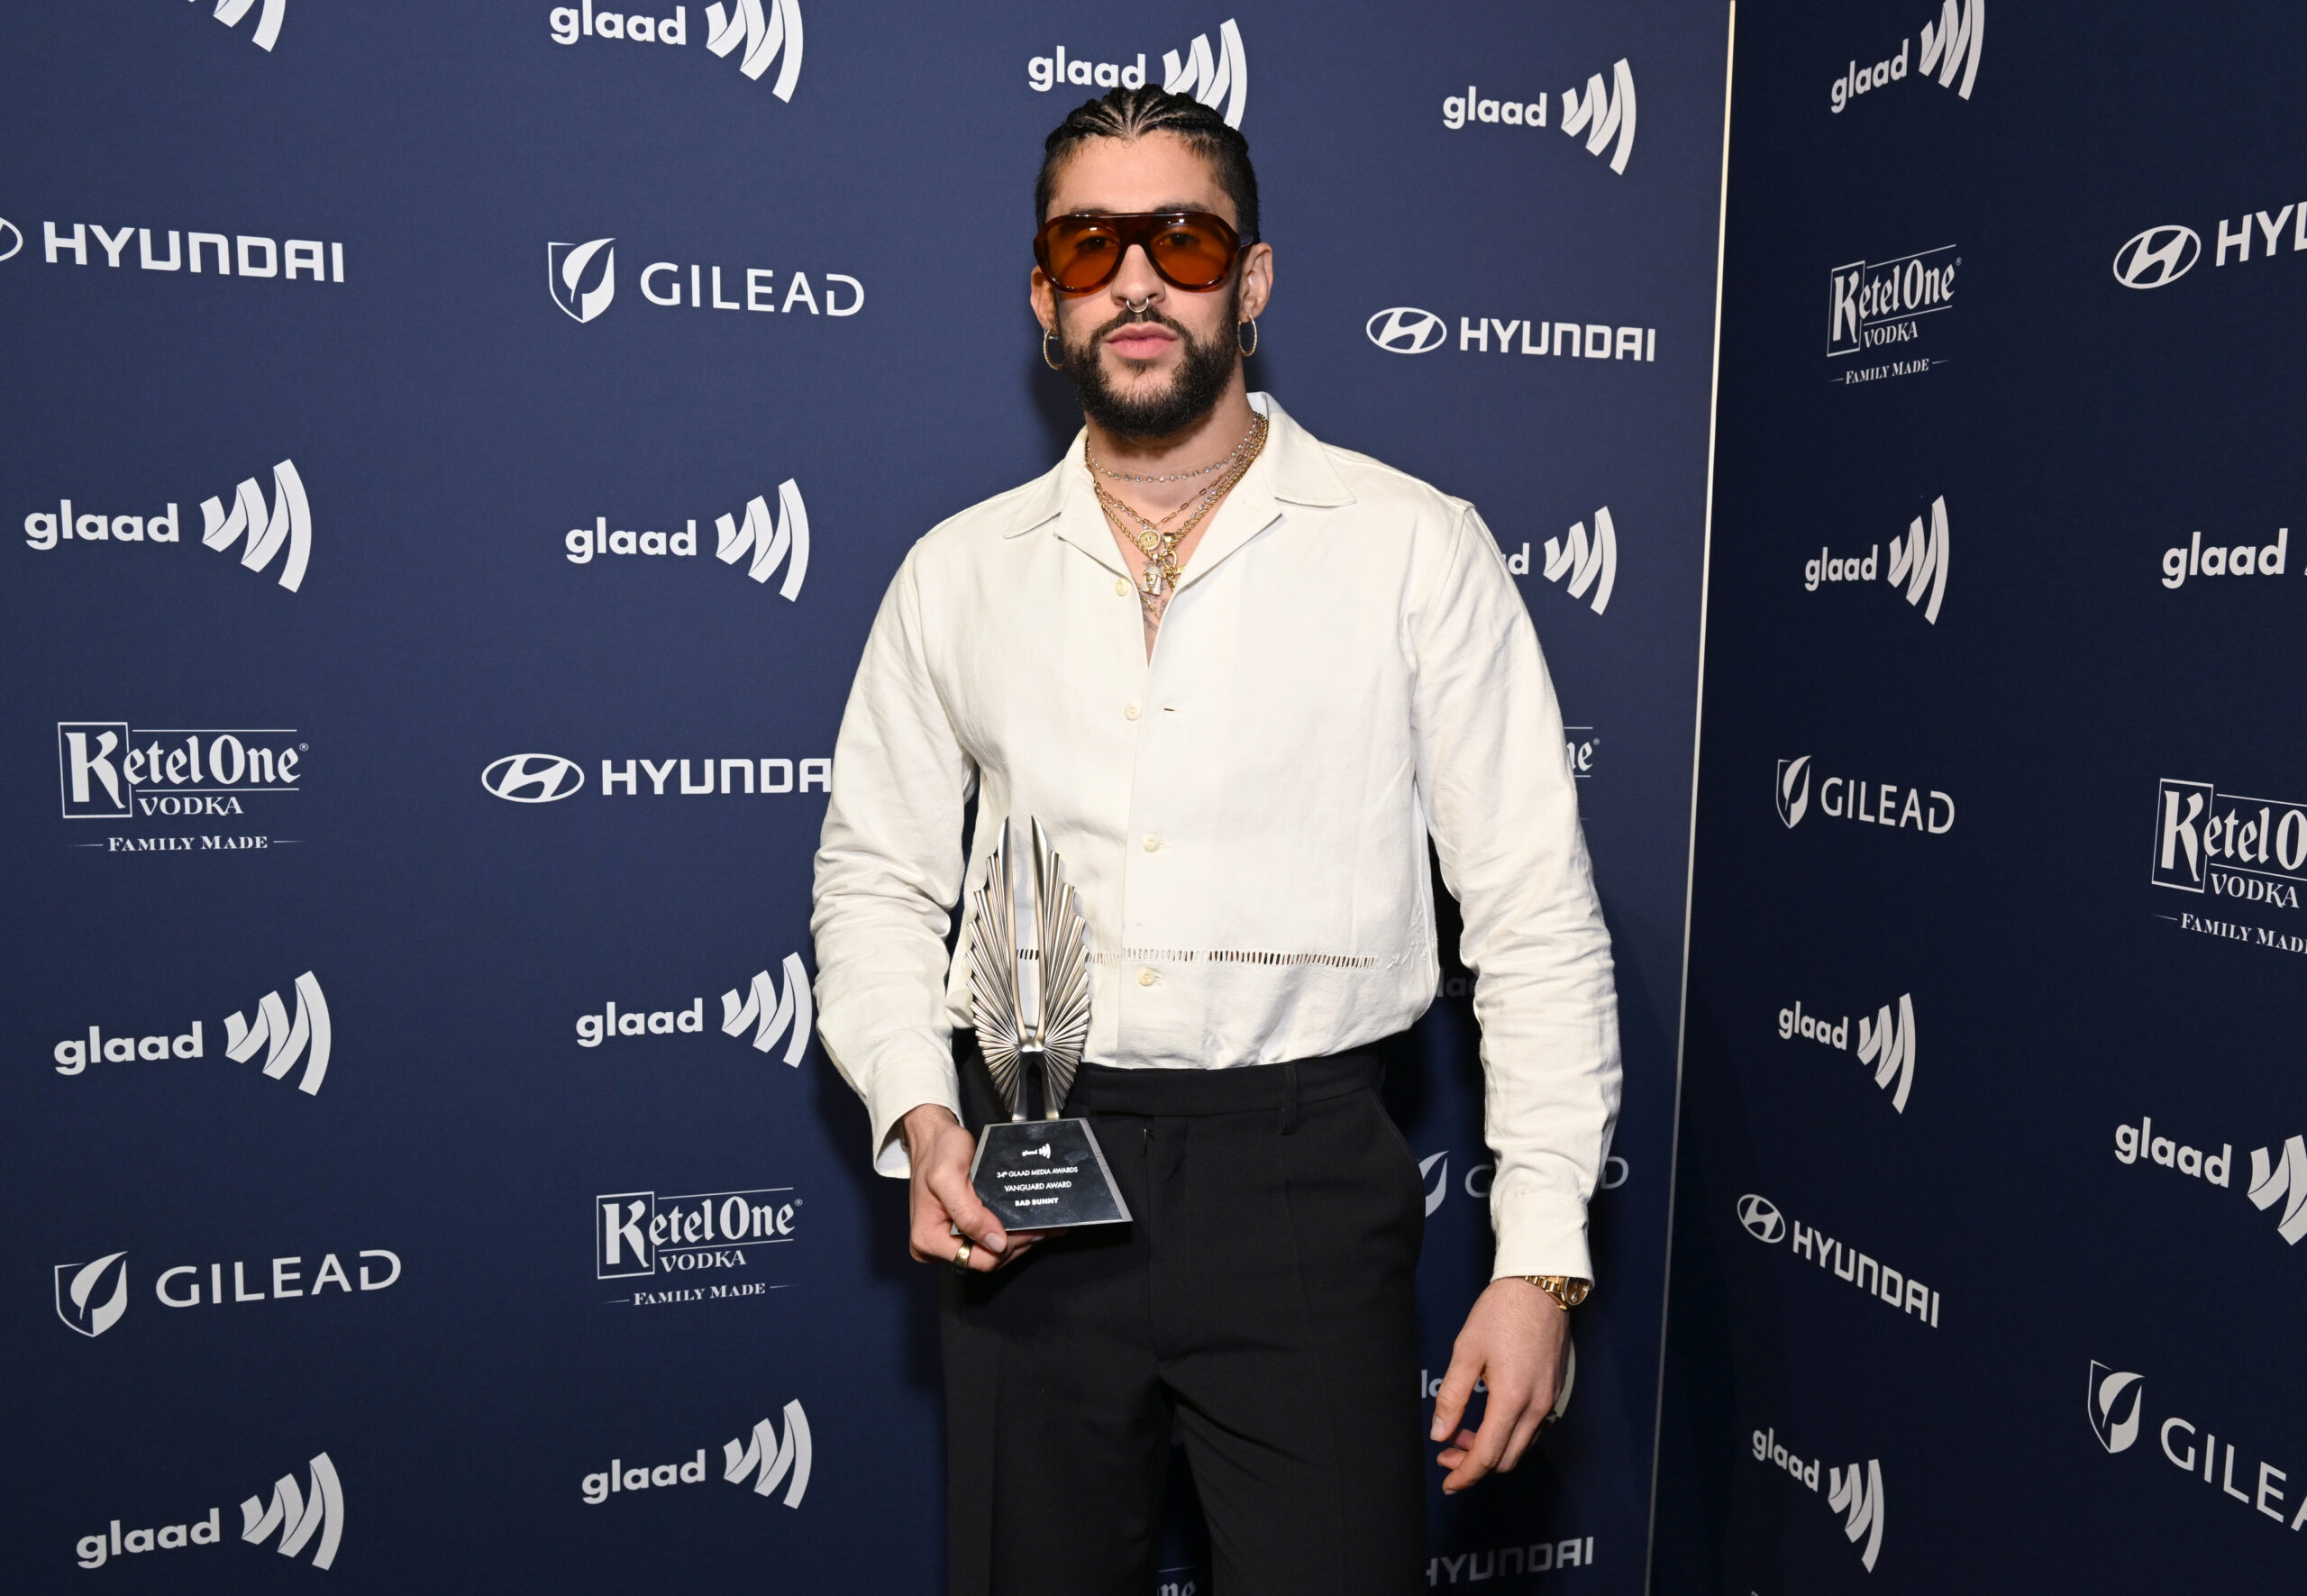 BEVERLY HILLS, CALIFORNIA - MARCH 30: Honoree Bad Bunny attends the GLAAD Media Awards at The Beverly Hilton on March 30, 2023 in Beverly Hills, California. (Photo by Michael Kovac/Getty Images for GLAAD)